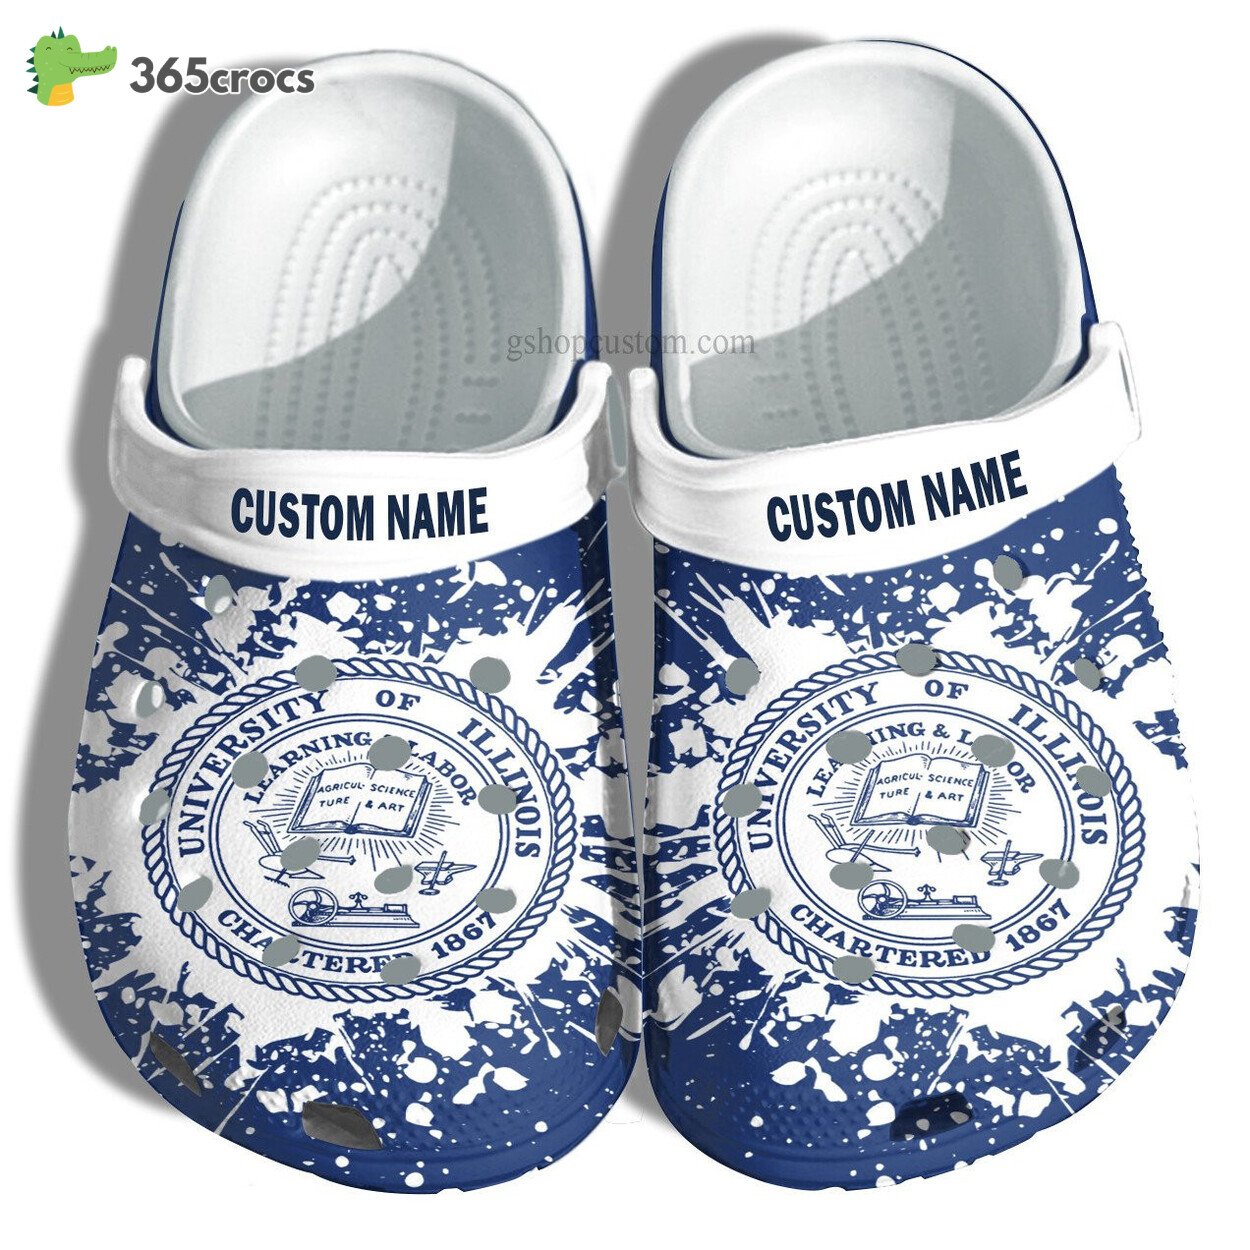 University Of Illinois Graduation Gifts Croc Shoes Customize Admission Gift Shoes